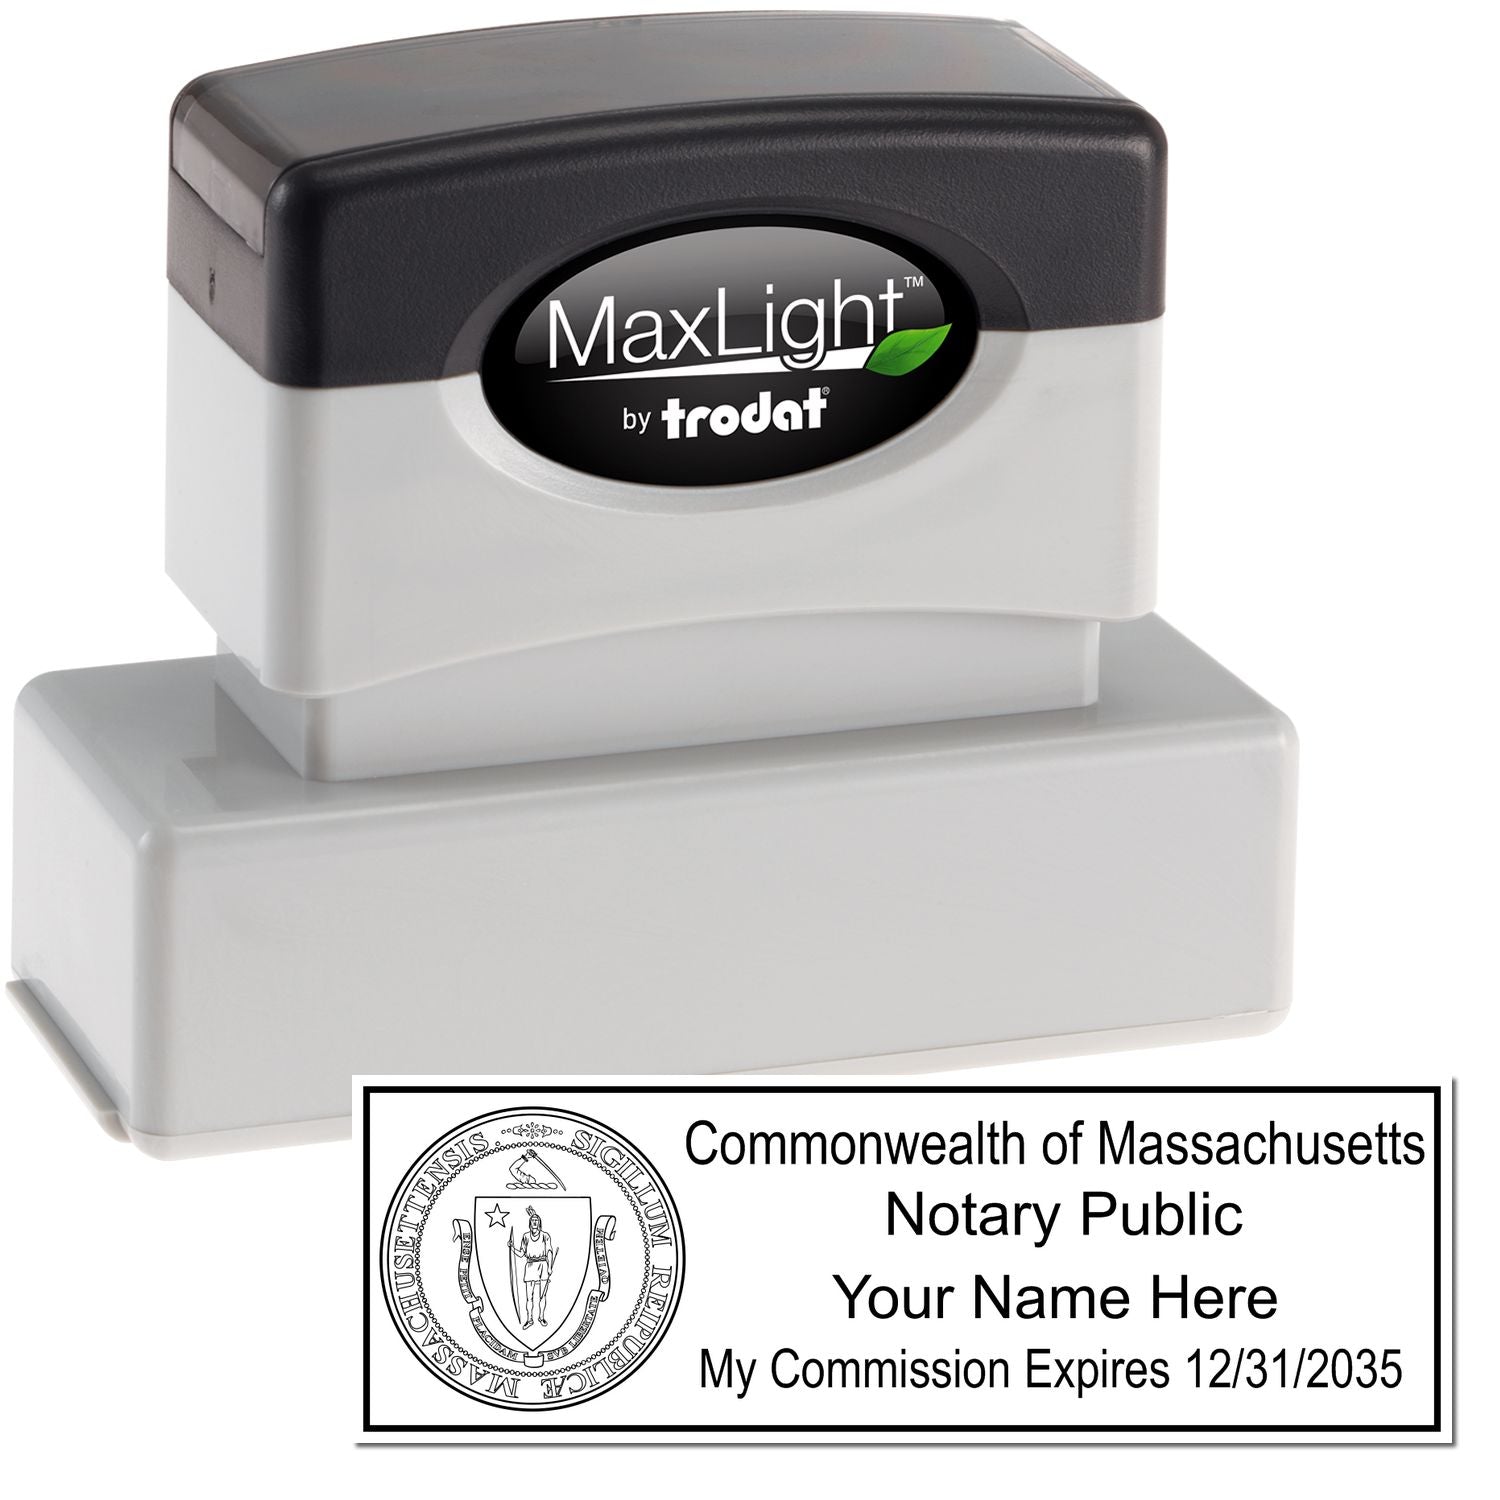 The main image for the MaxLight Premium Pre-Inked Massachusetts State Seal Notarial Stamp depicting a sample of the imprint and electronic files